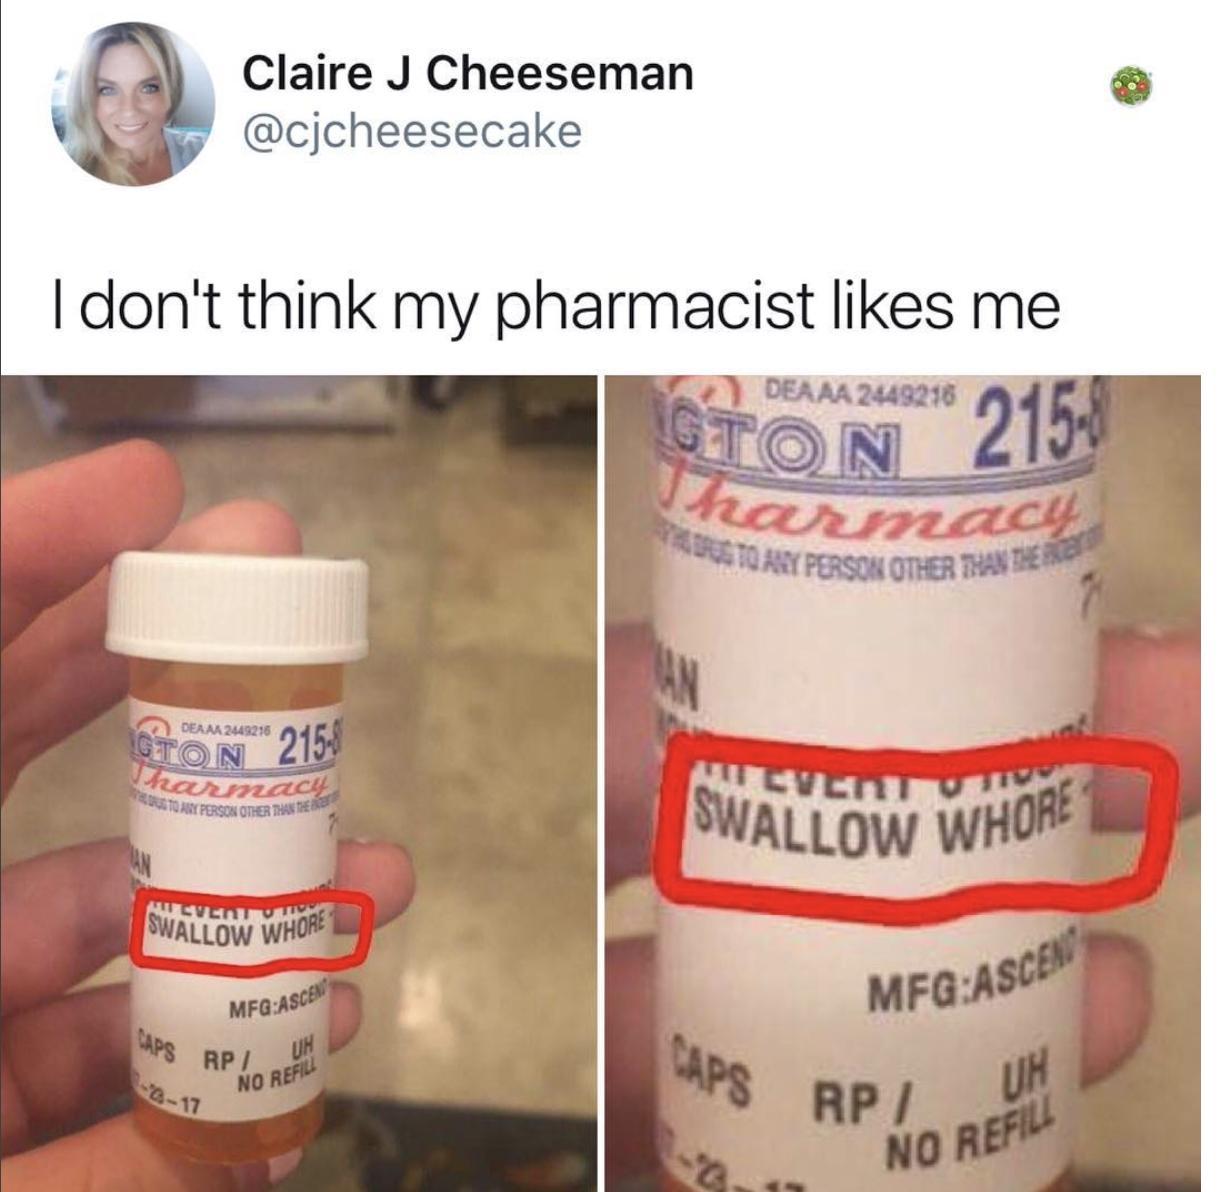 swallow meme - Claire J Cheeseman I don't think my pharmacist me Deaaa 2449218 Iston 215 acy To Hyperstin Other Hande V Deaaa 2449275 158 Gton 2139 armacy To Any Person Other Than The WITVLinus Swallow Whore Sveto Swallow Whore MfgAscend MfgAscen Rp Uh Ca